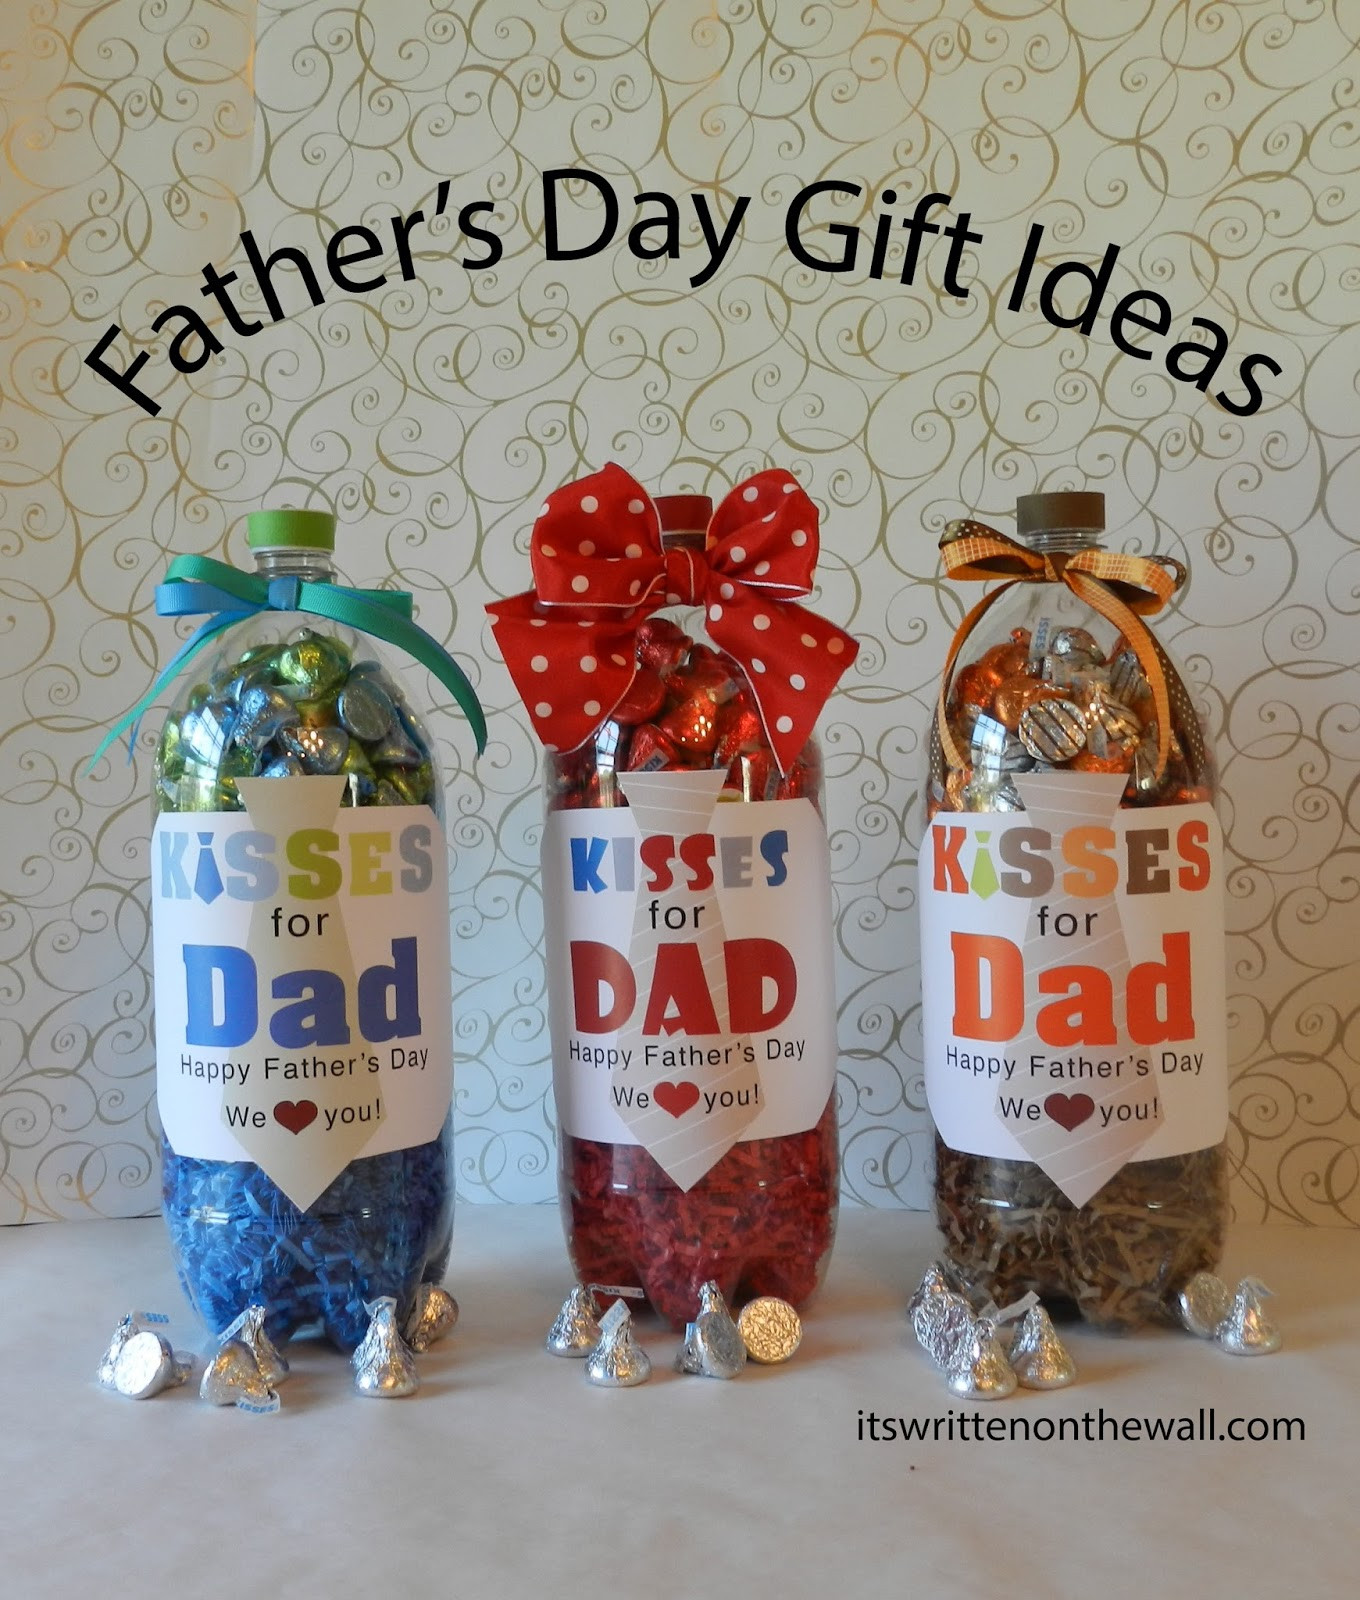 Father'S Day Gift Ideas To Make
 It s Written on the Wall Fathers Day Gift Ideas For the